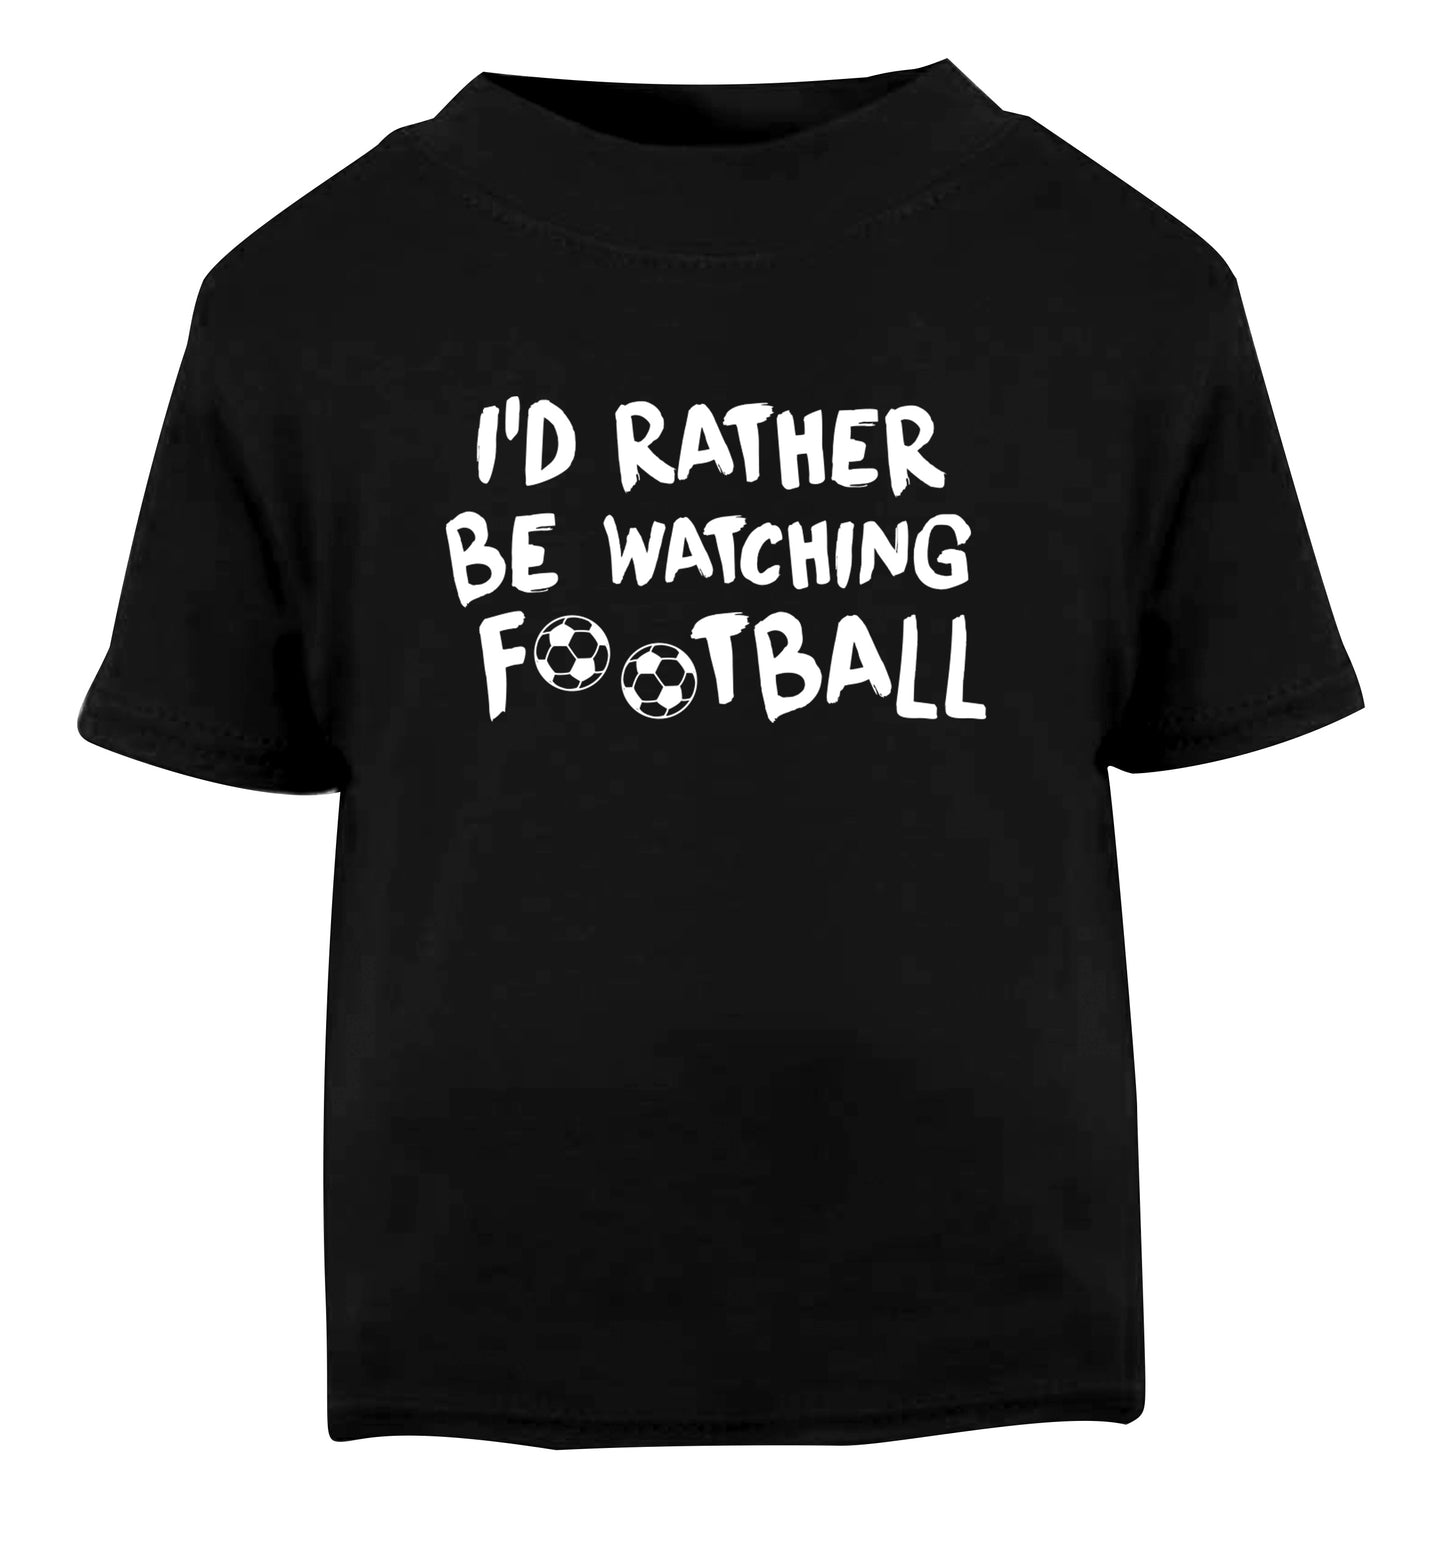 I'd rather be watching football Black Baby Toddler Tshirt 2 years